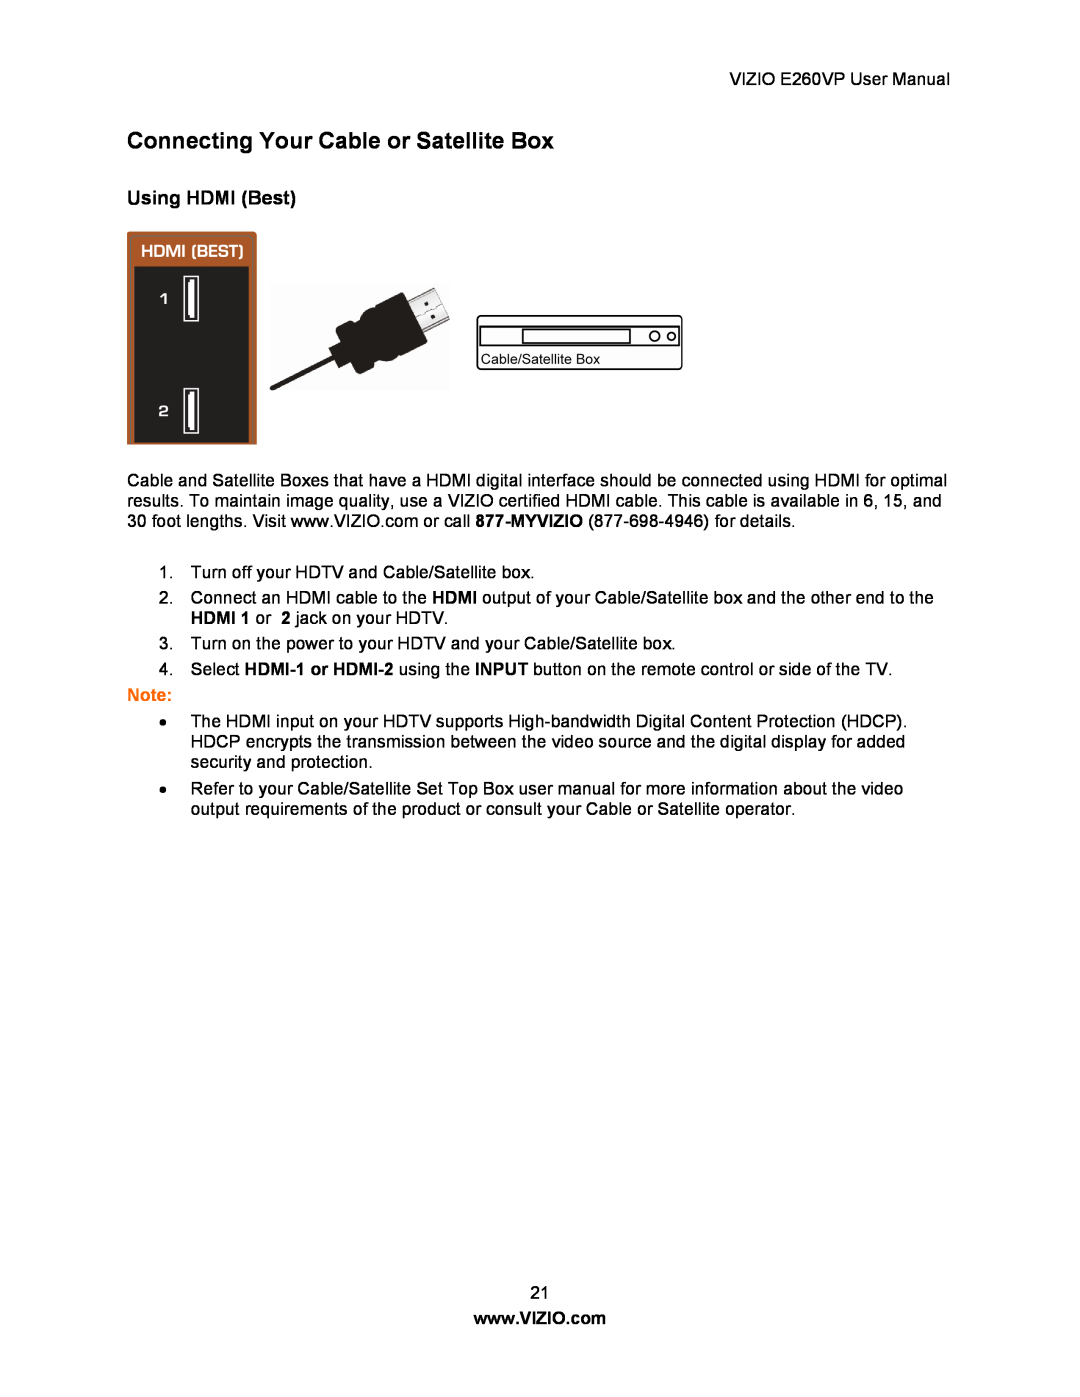 Vizio E260VP user manual Connecting Your Cable or Satellite Box, Using HDMI Best 